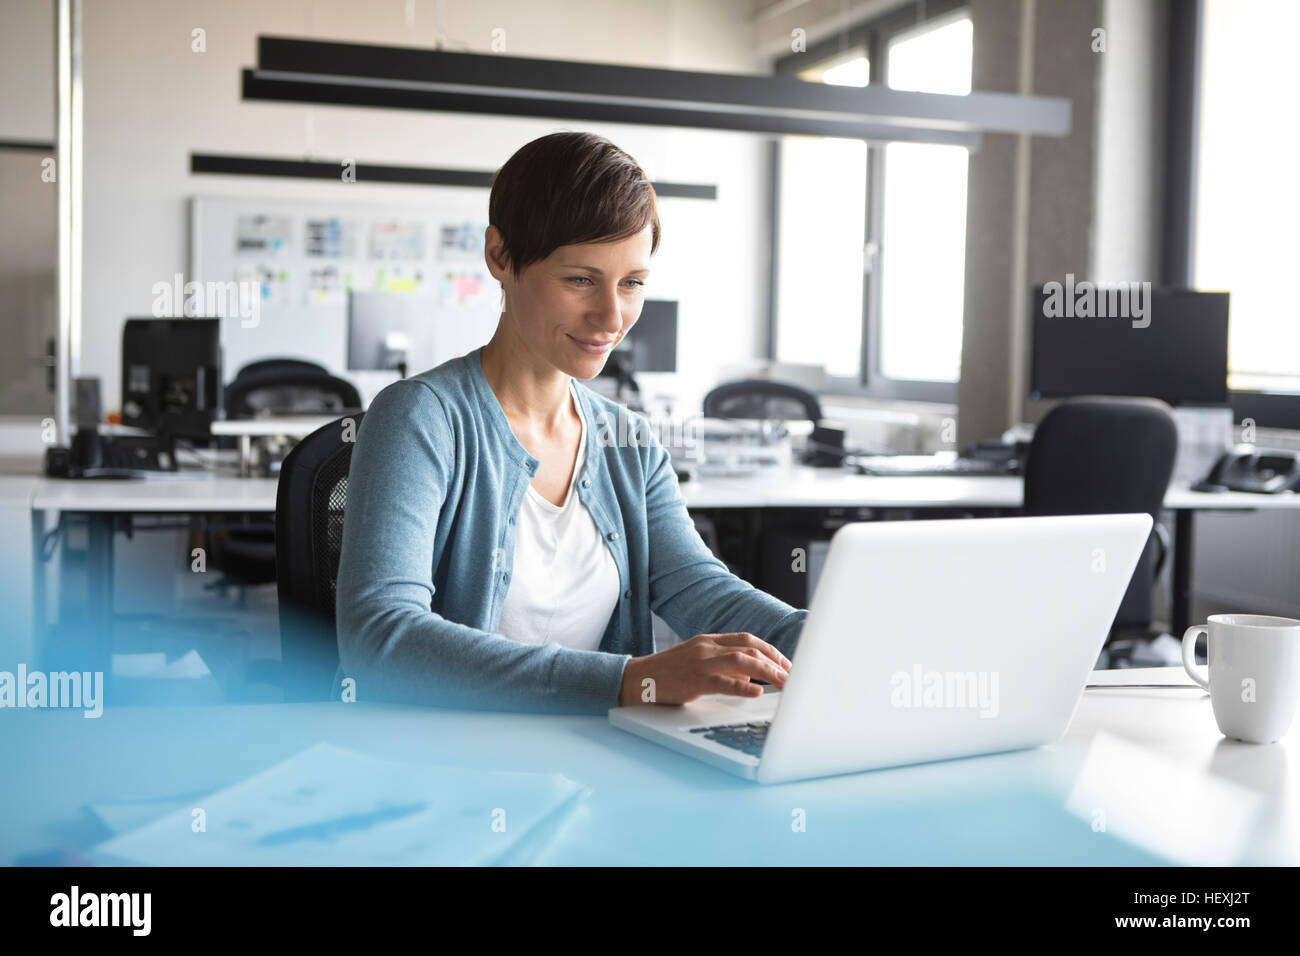 Businesswoman in office using laptop Stock Photo